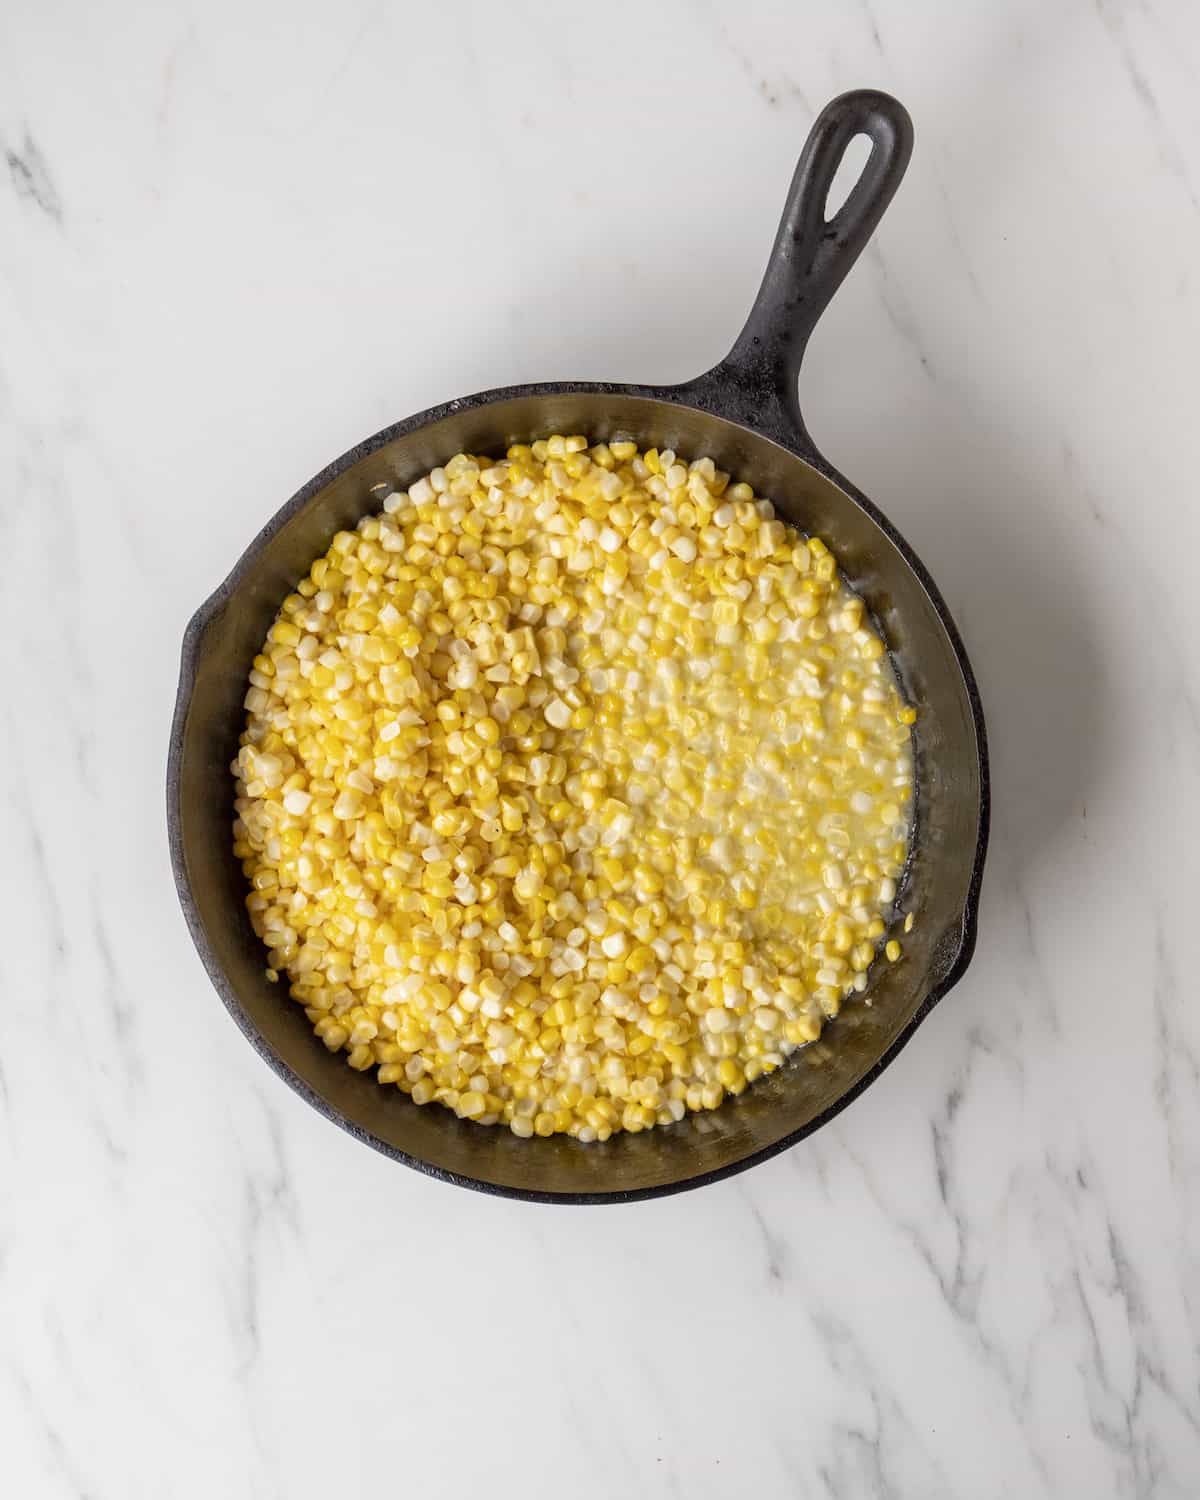 A skillet with melted butter and uncooked yellow corn.